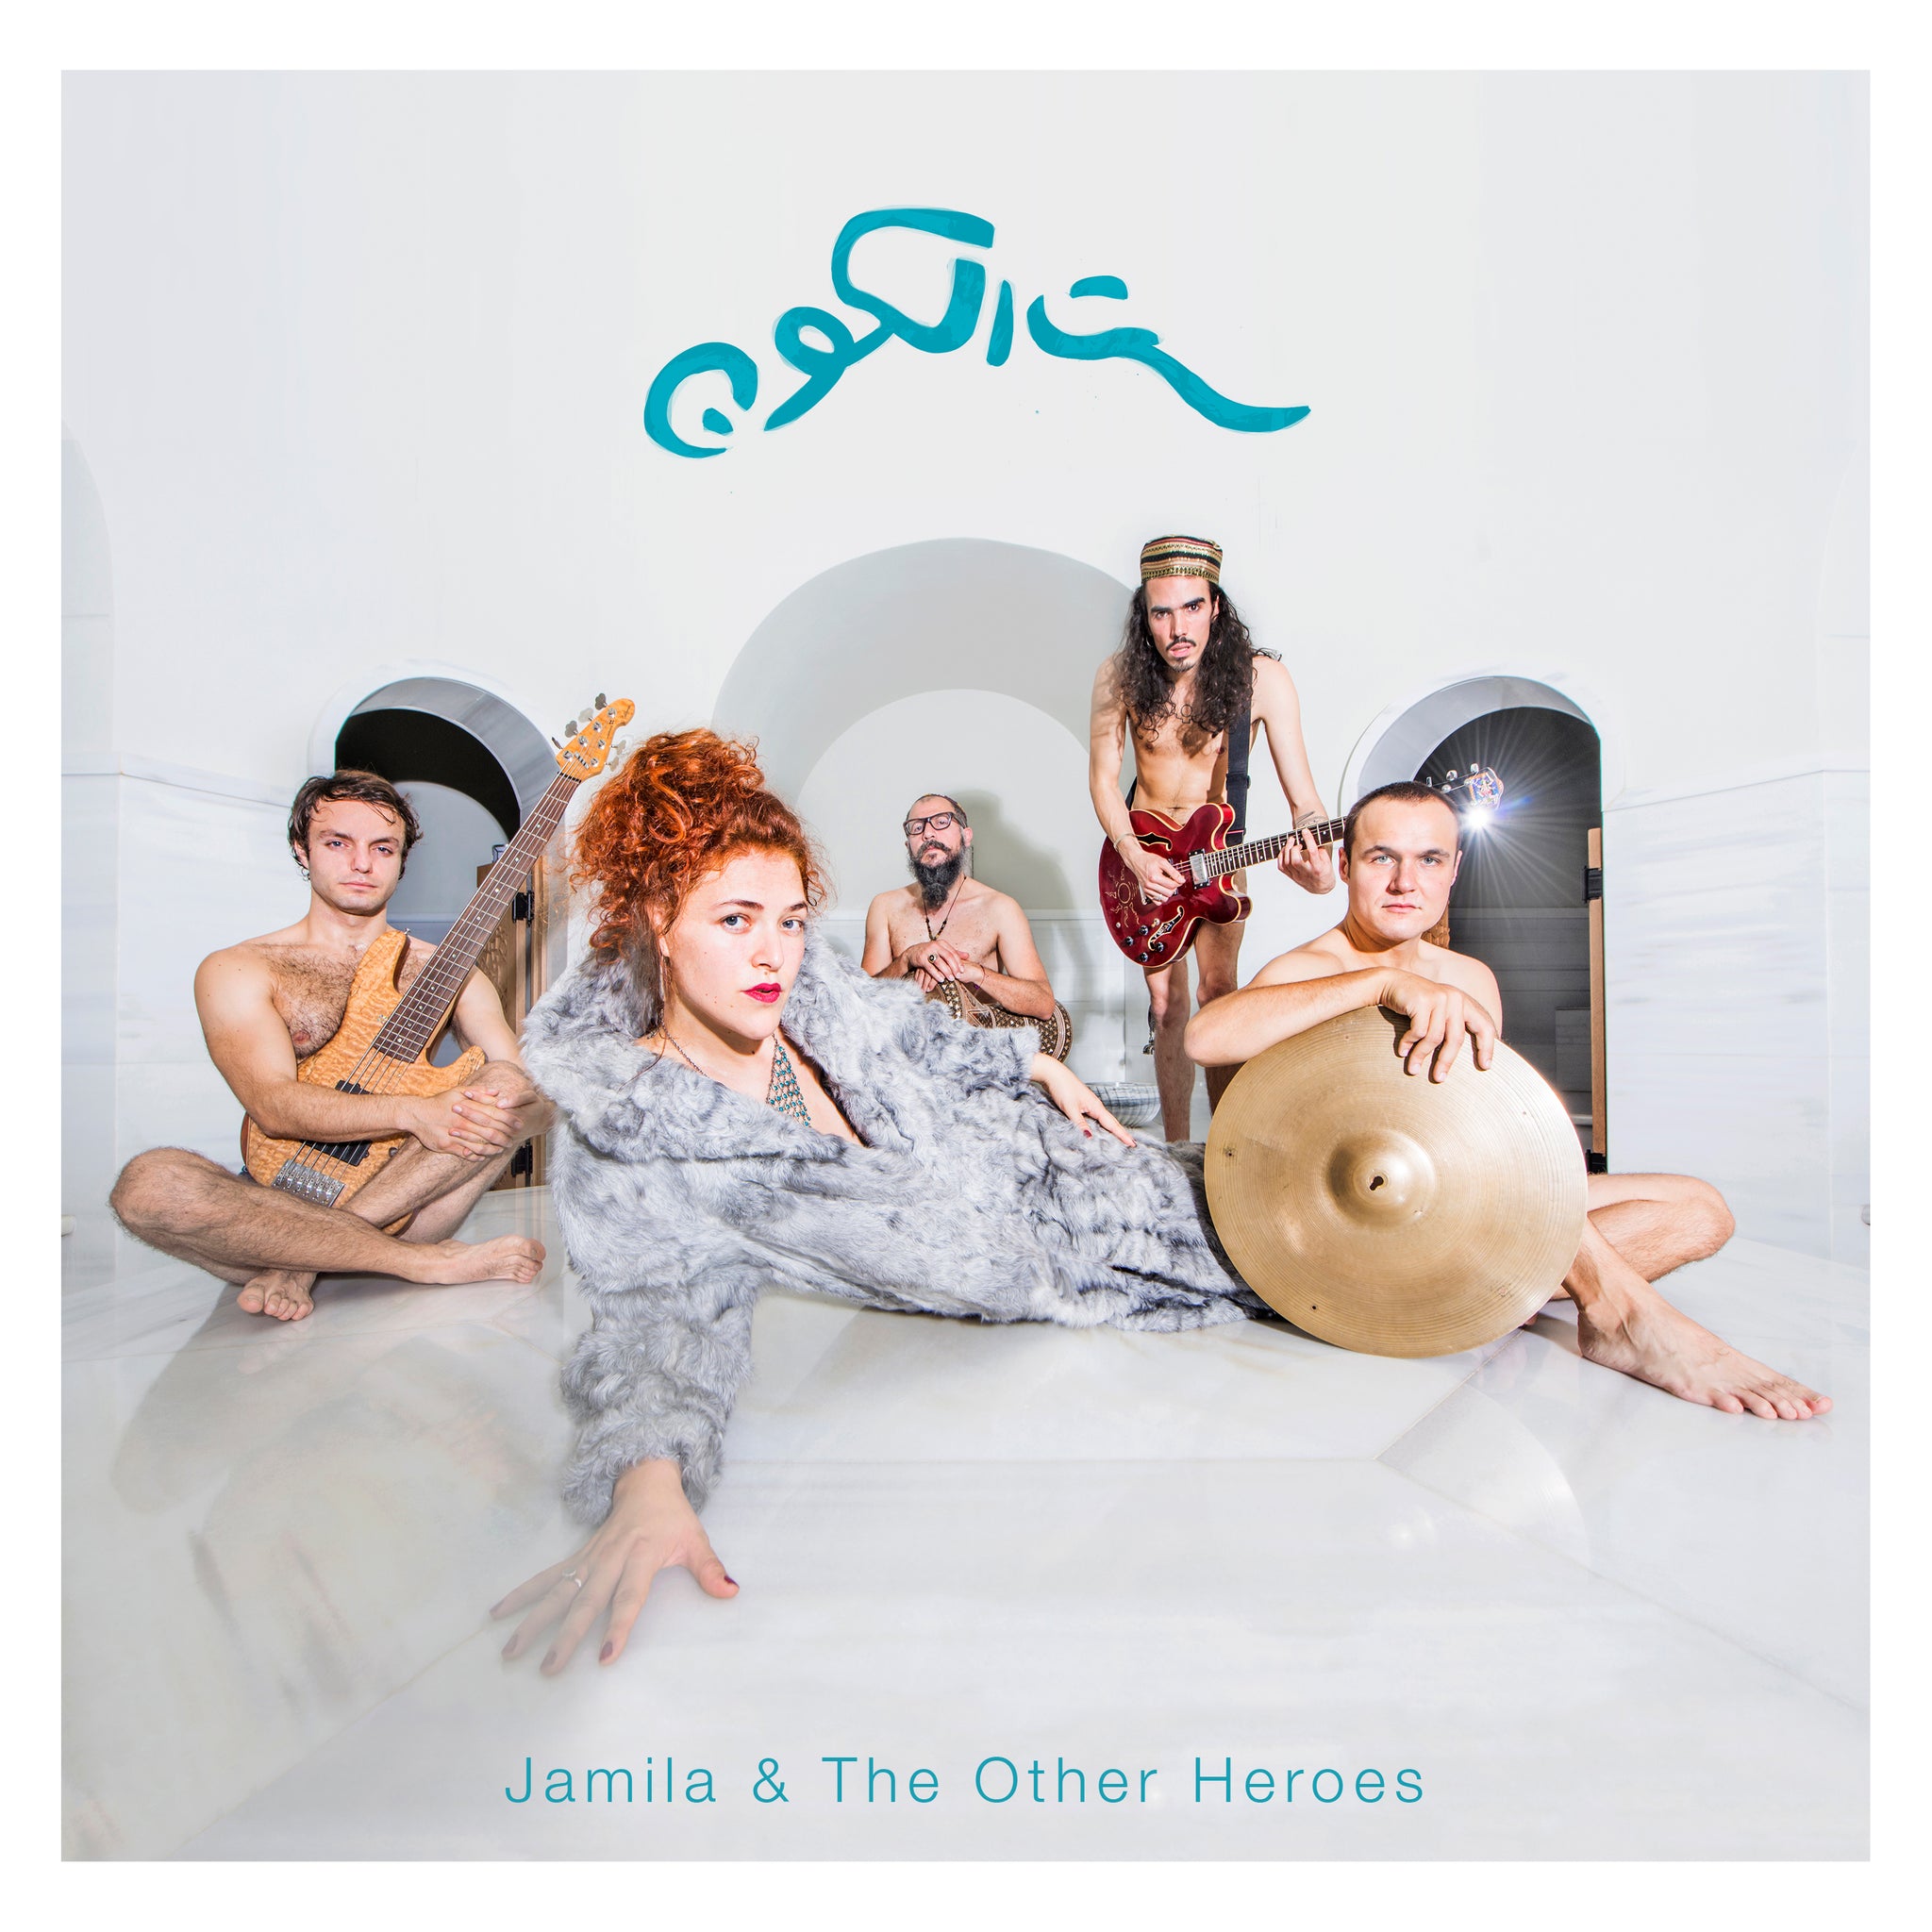 Jamila & The Other Heroes - Sit El Kon (The Grandmother of the Universe) (CD / Vinyl)